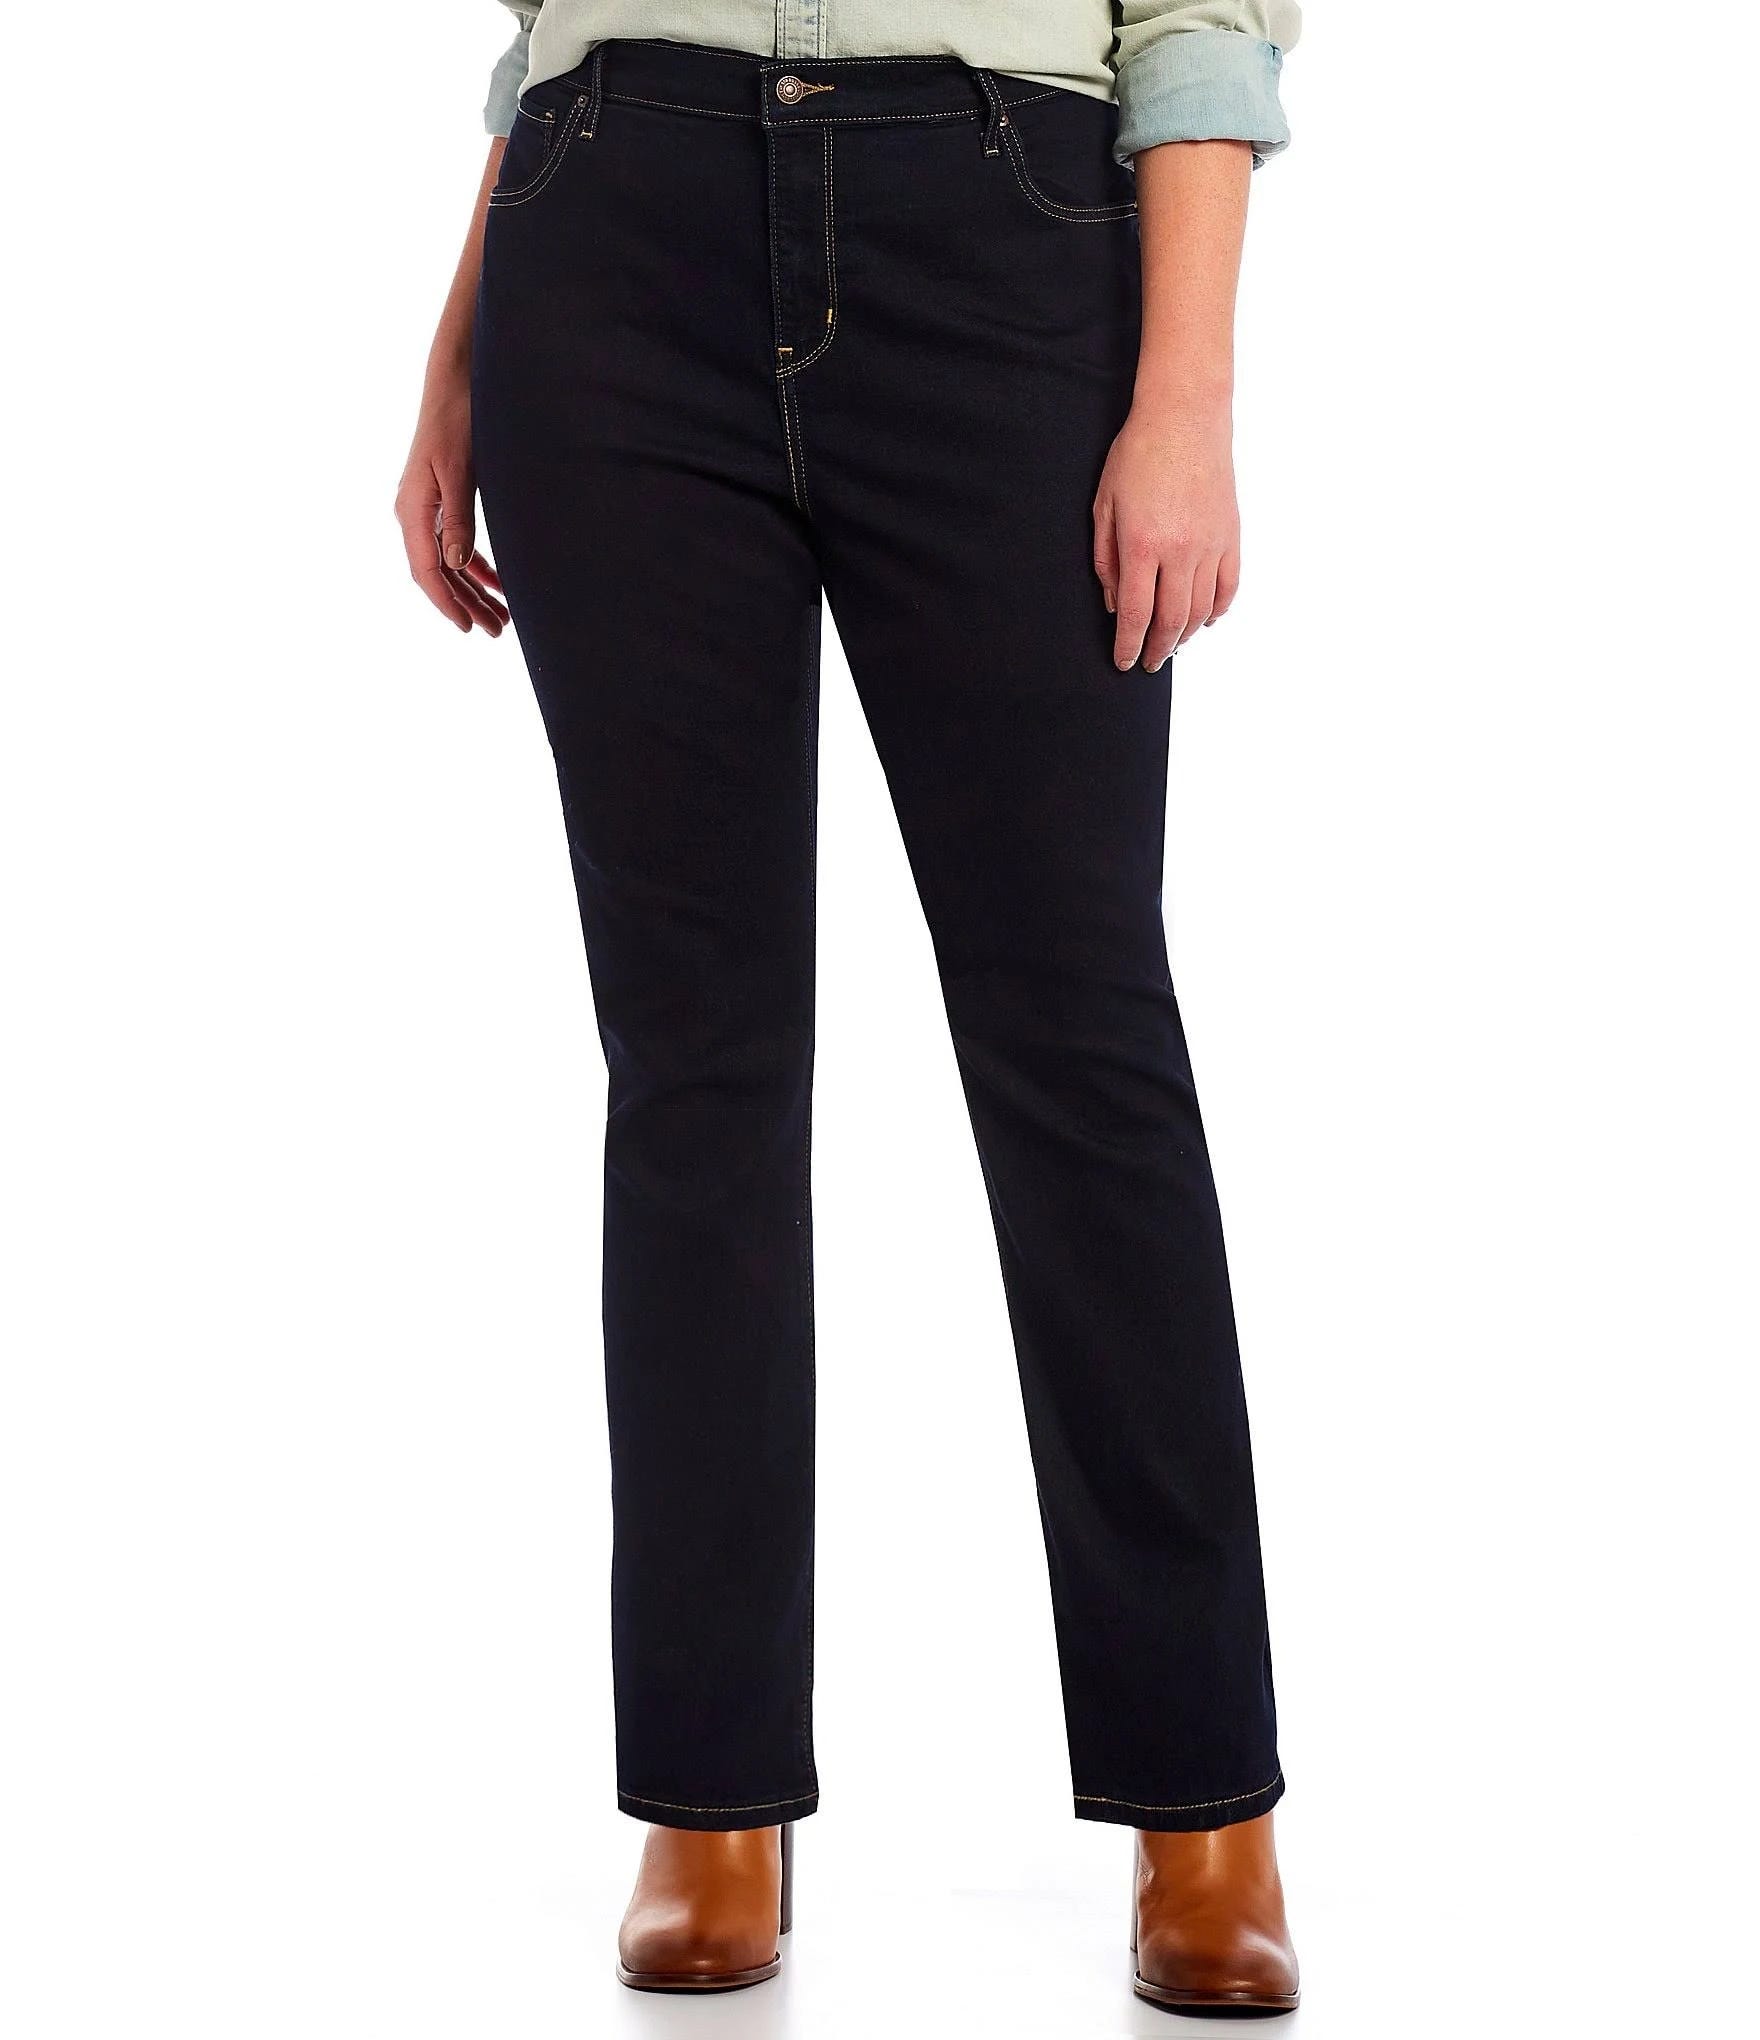 Levi's Plus Size High-Rise Straight Jeans for Curvy Bodies | Image